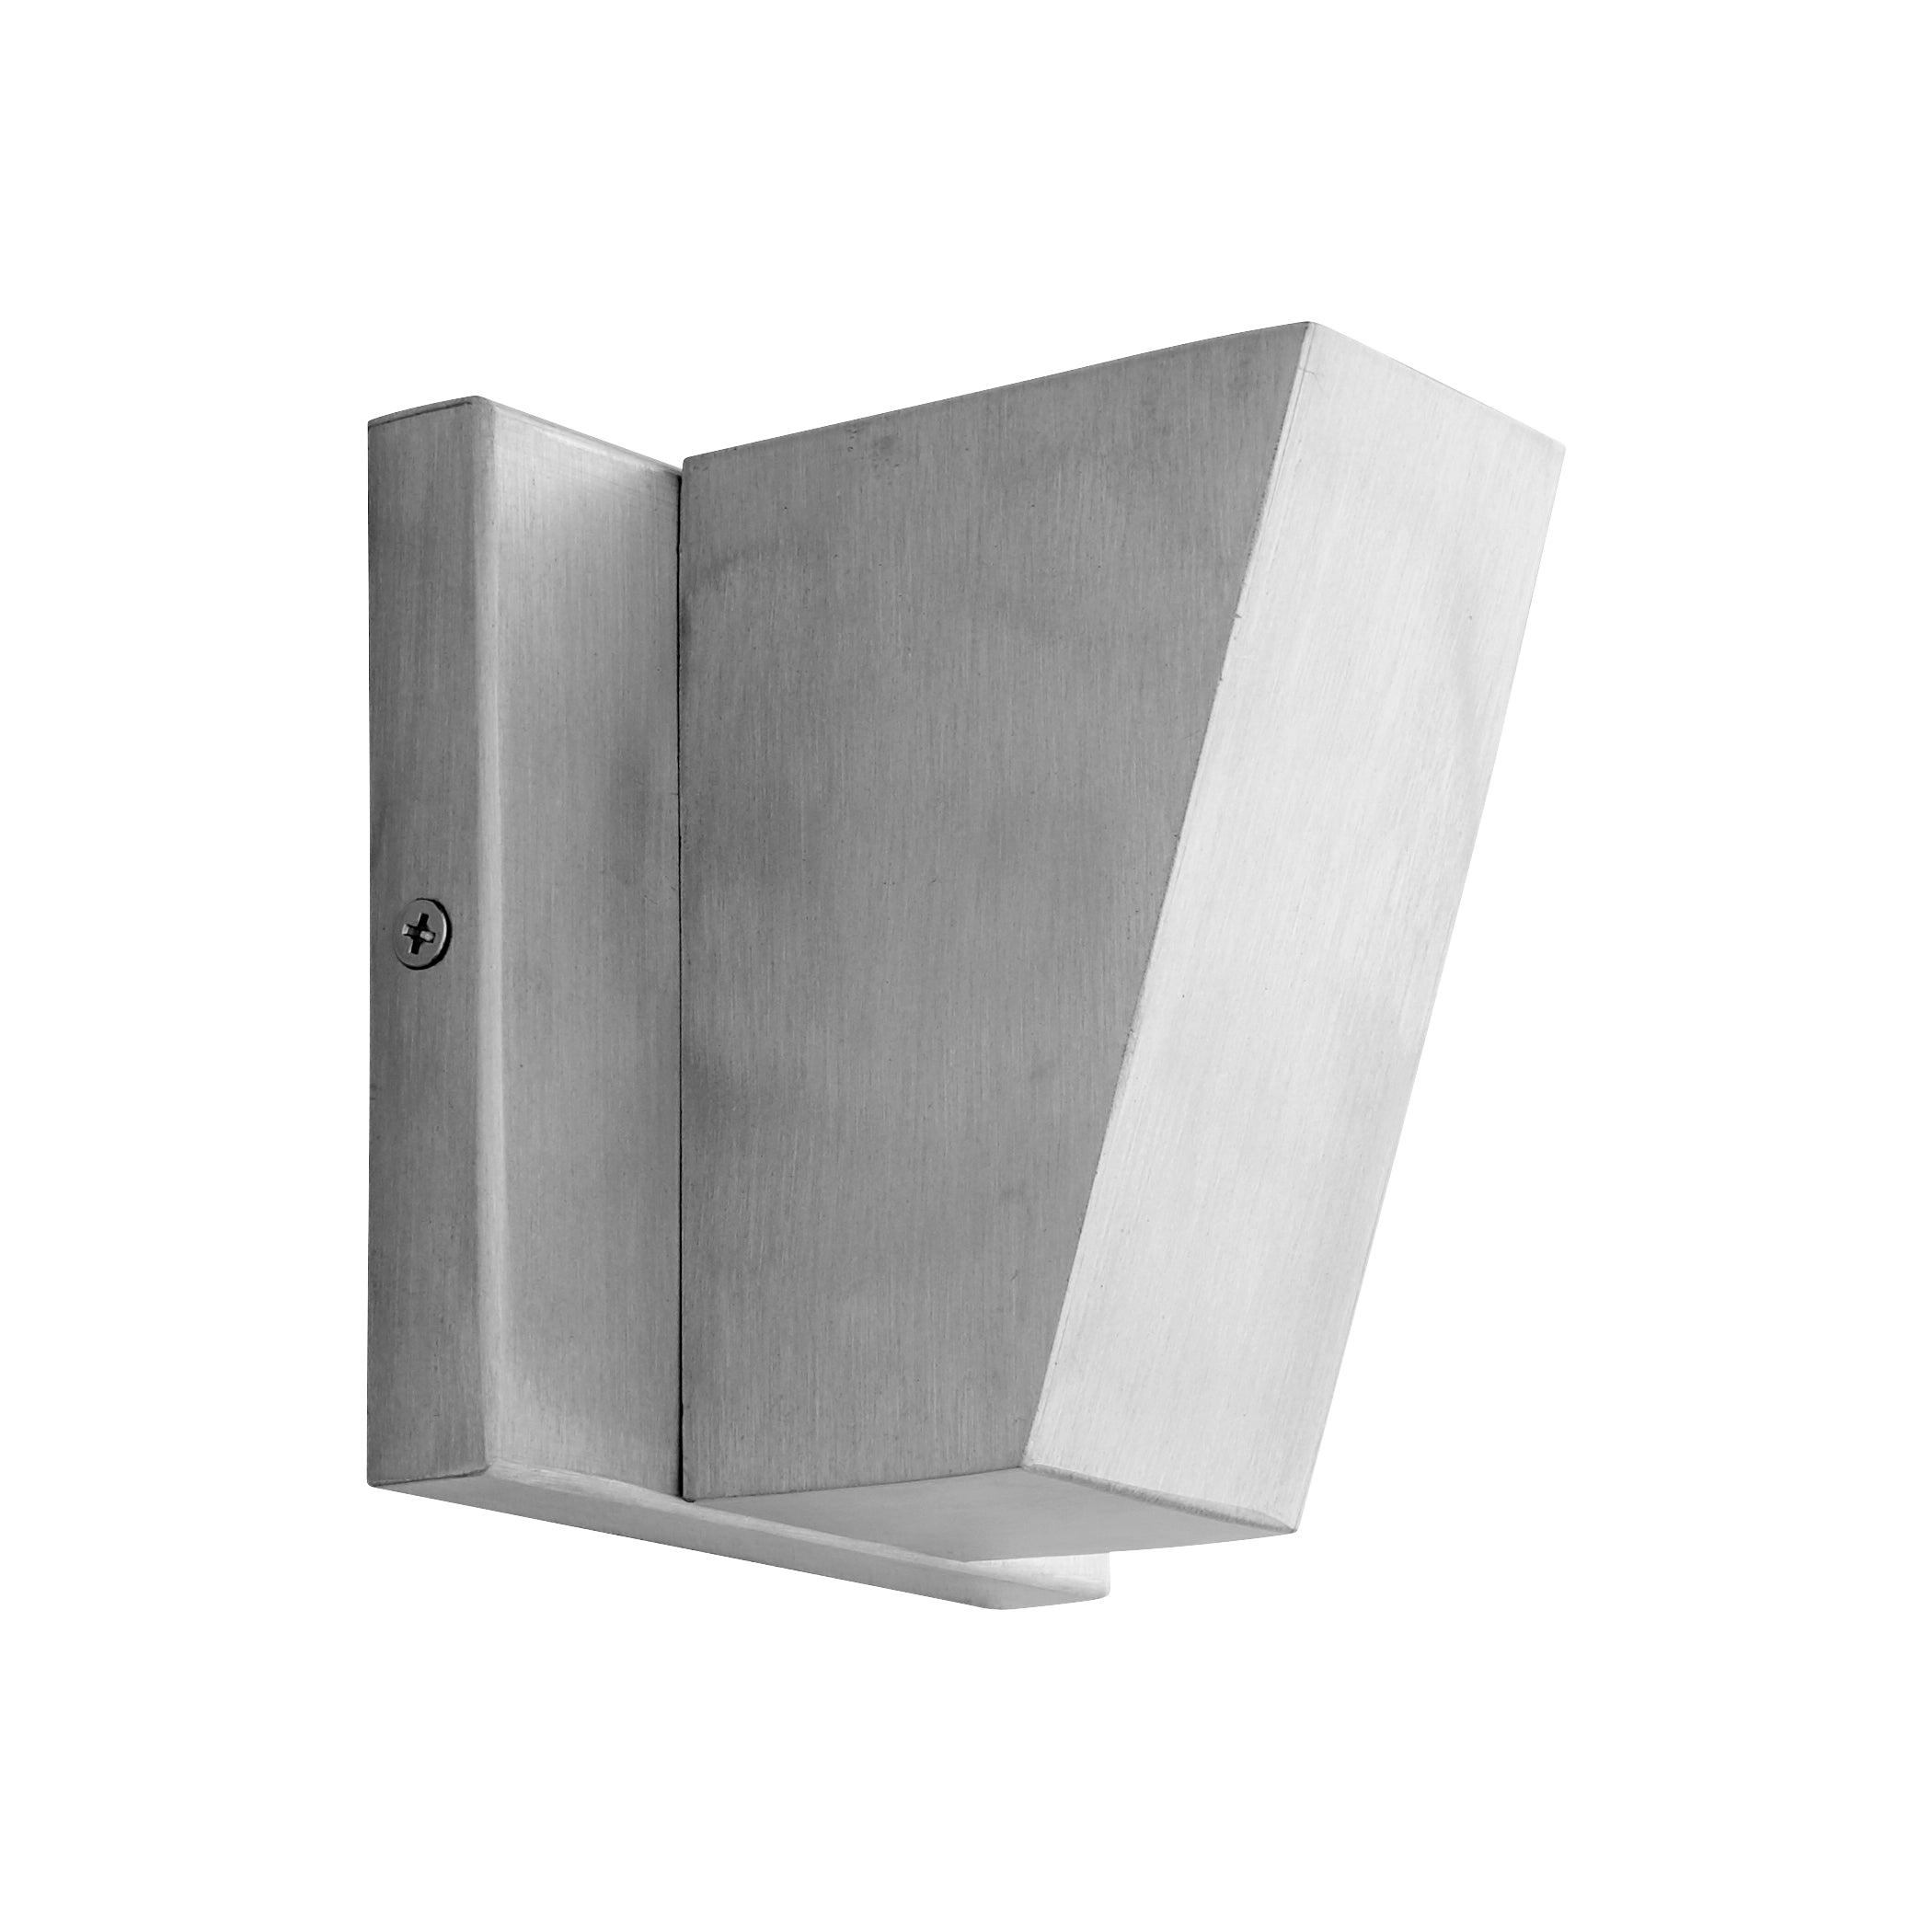 Oxygen TITAN 3-708-16 Outdoor LED Wall Sconce Light - Brushed Aluminum, White Frost Glass Diffuser